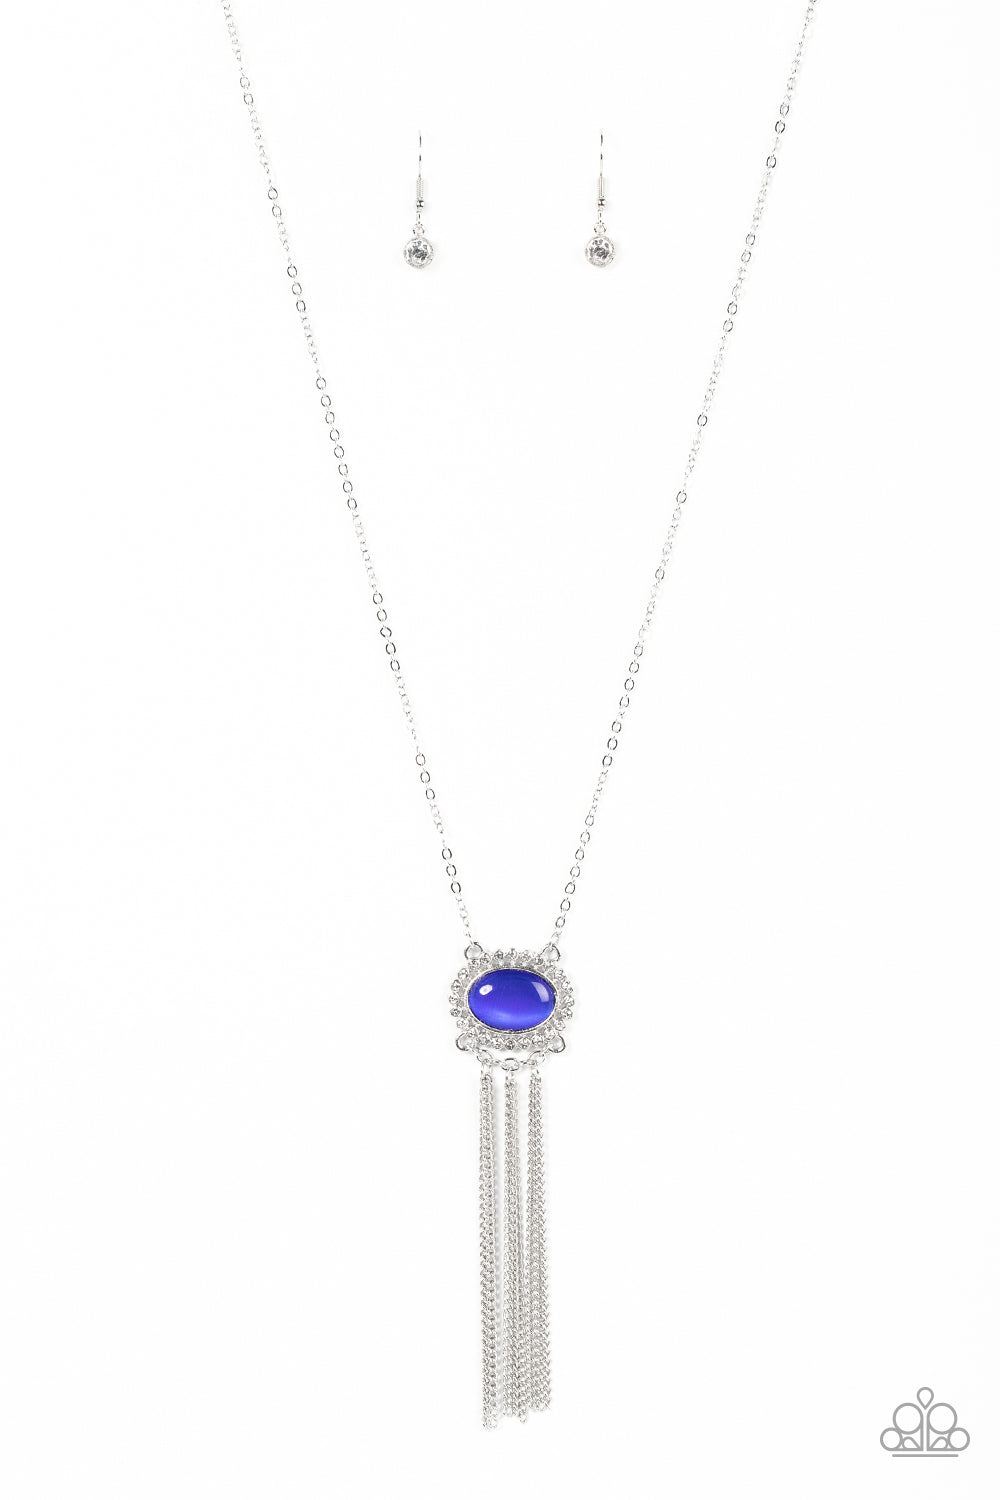 Happily Ever Ethereal - blue - Paparazzi necklace